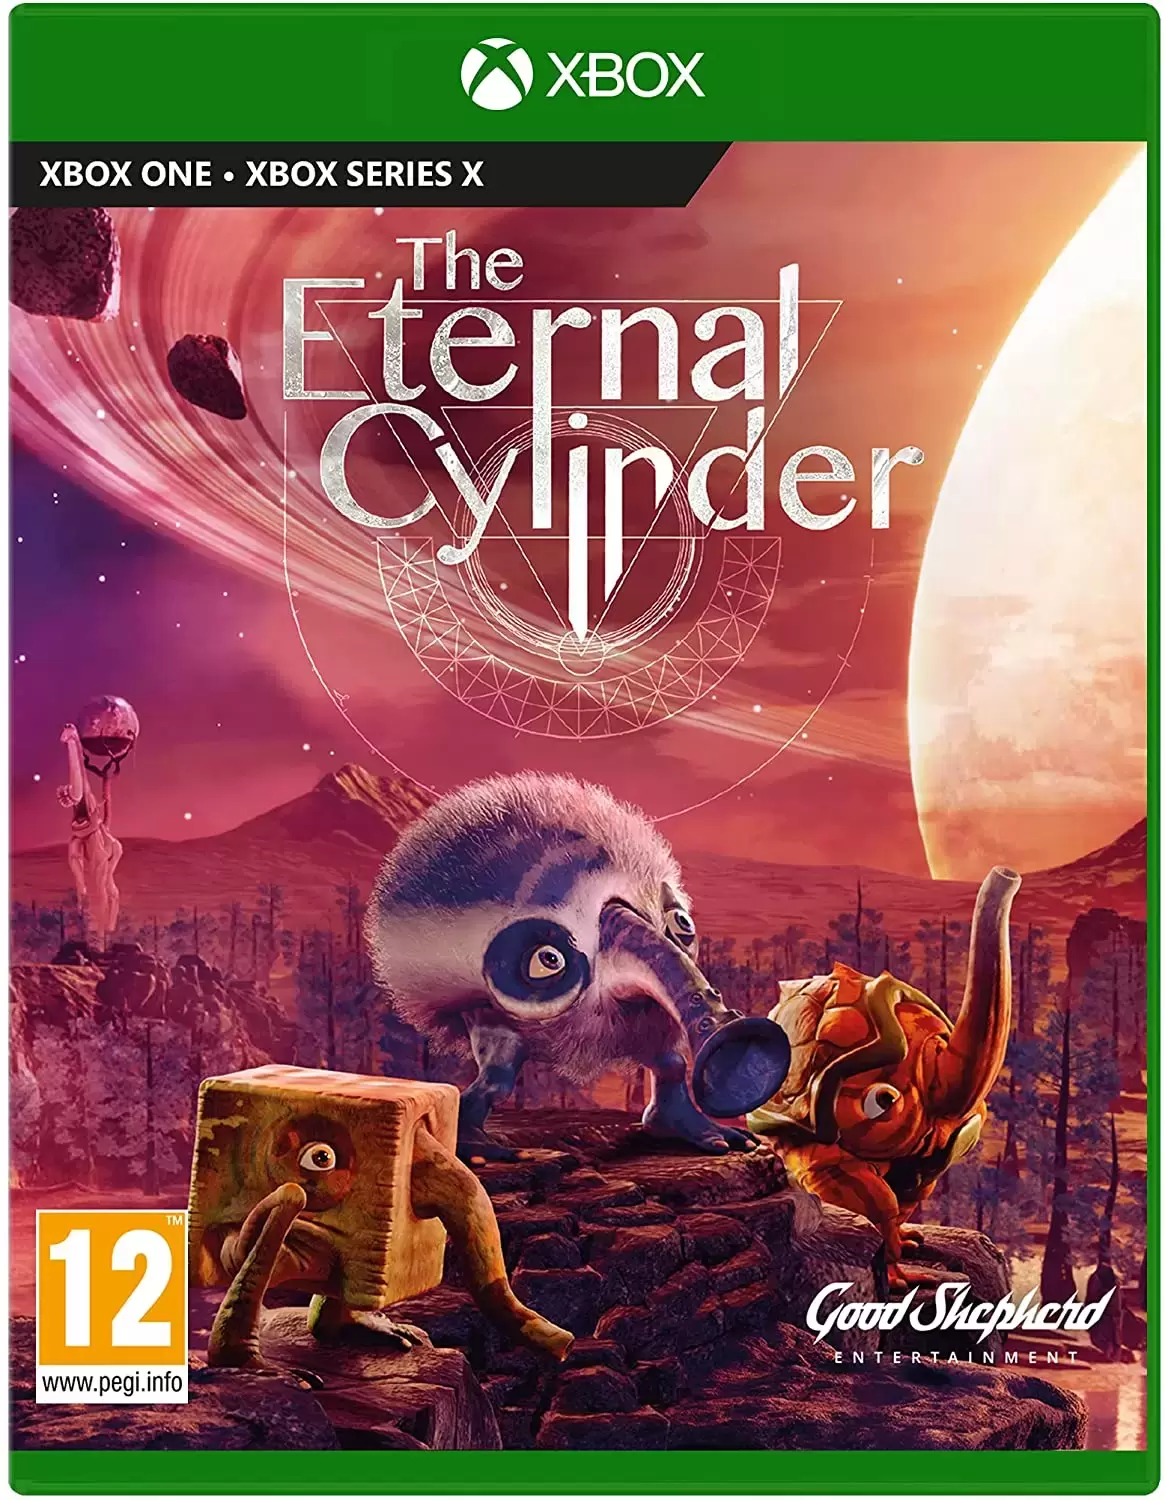 XBOX One Games - The Eternal Cylinder